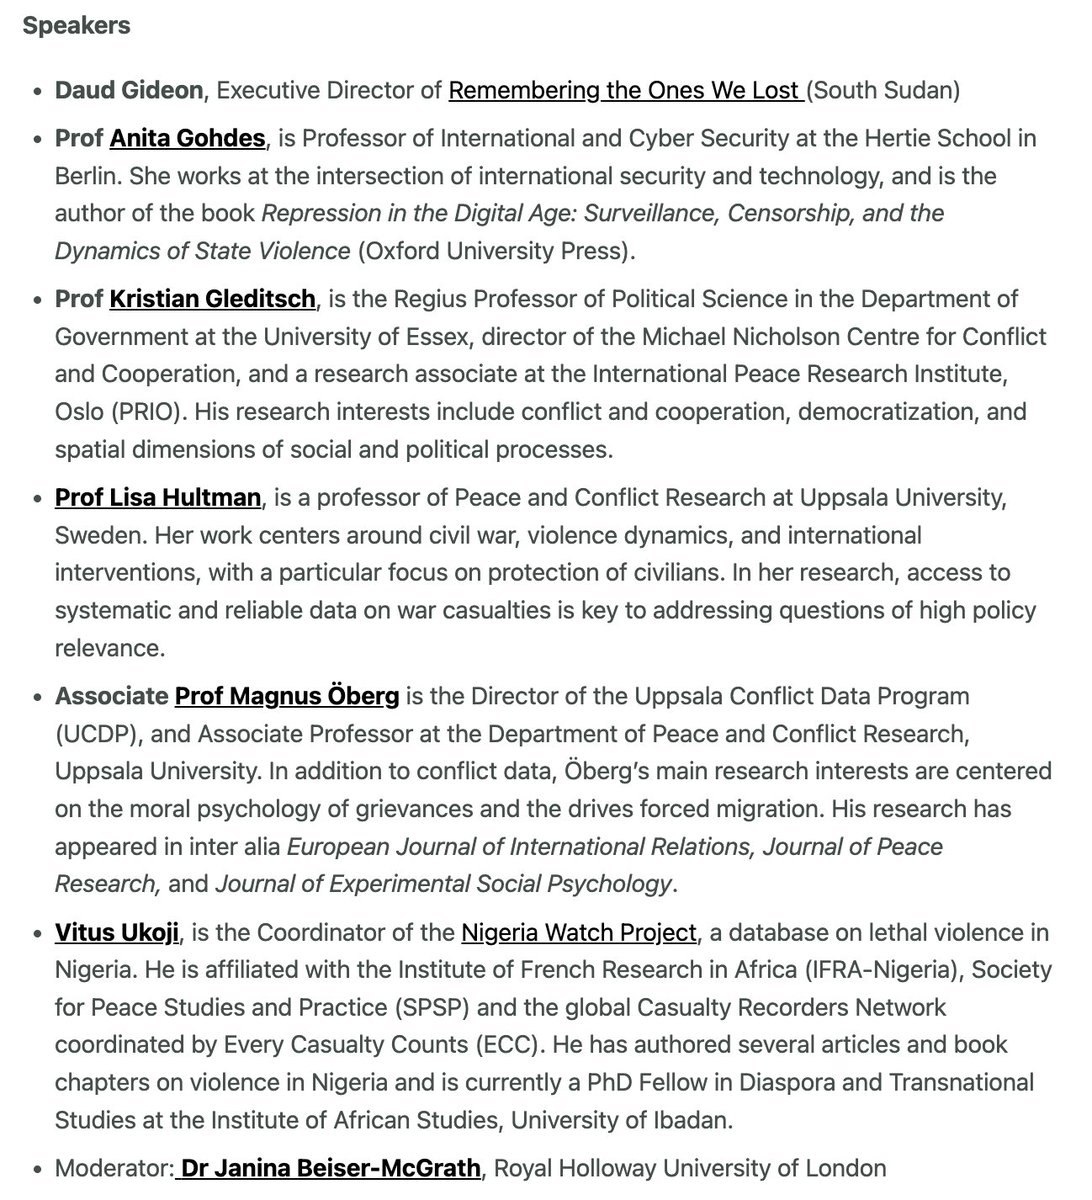 Timely upcoming webinar by @everycasualty co-convened by Dr. Sophia Dawkins and an amazing panel of experts on different methodological approaches to documenting civilian casualties in extremely repressive contexts w/ @jbeisermcgrath @ARGohdes @KSGleditsch @Magnusb34105434 & more